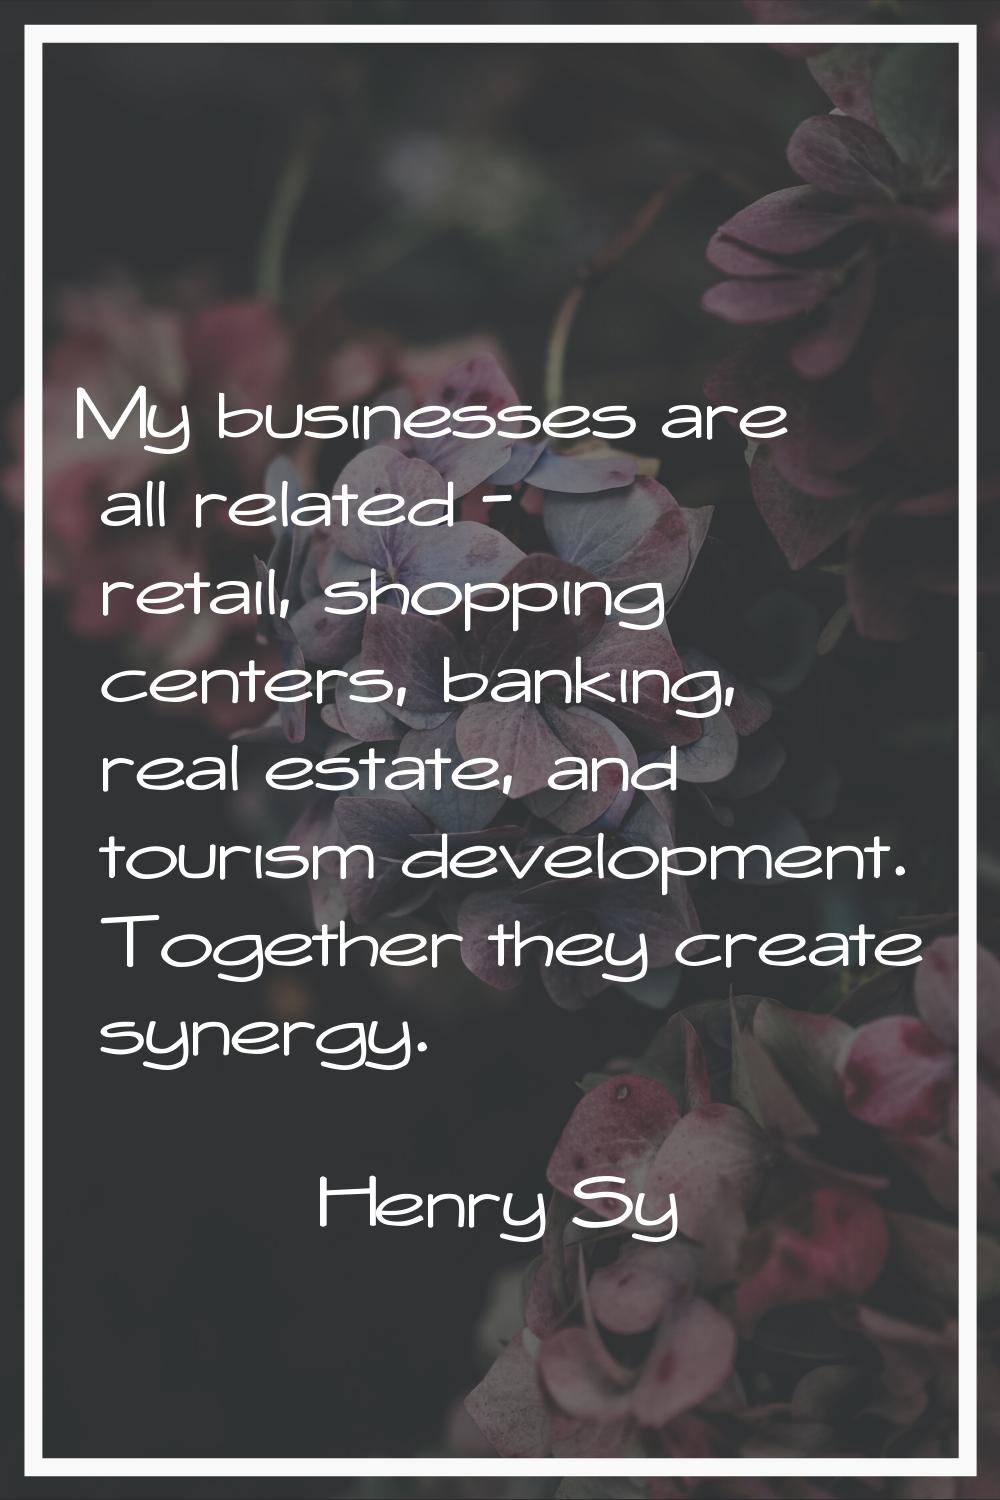 My businesses are all related - retail, shopping centers, banking, real estate, and tourism develop